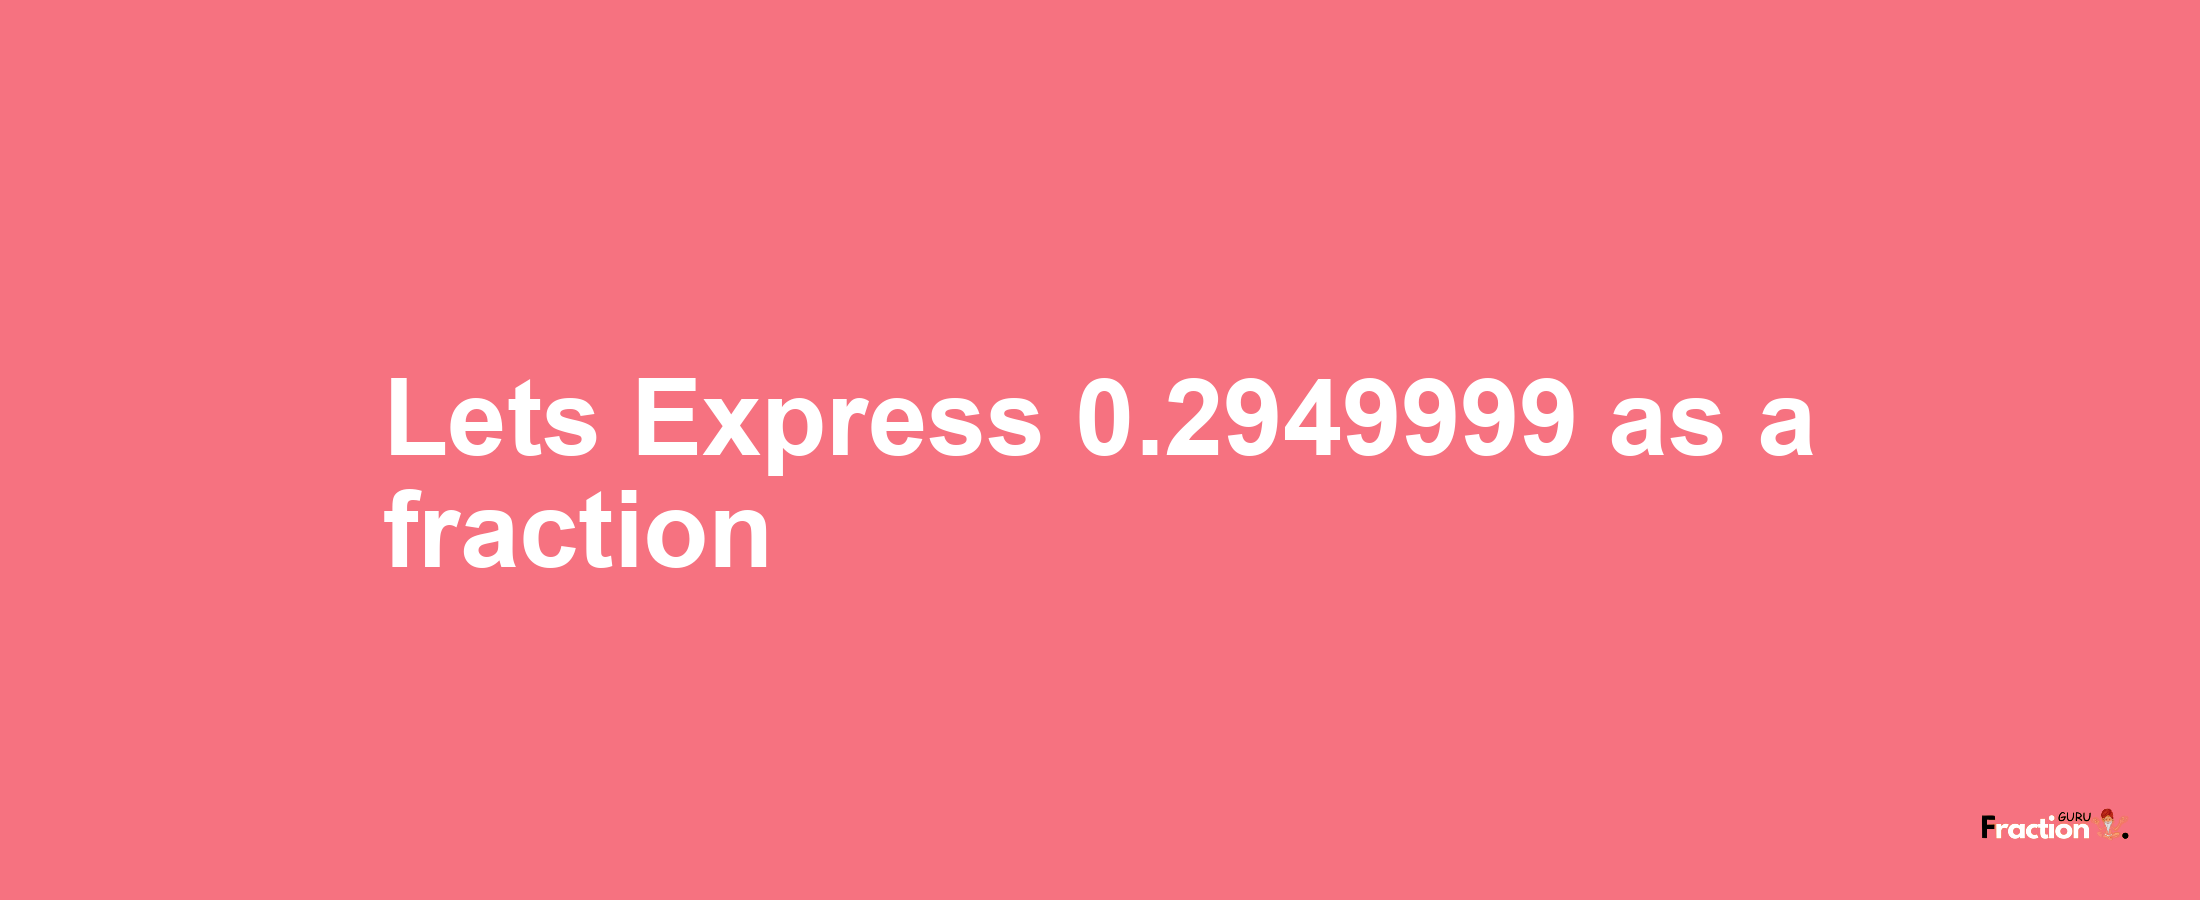 Lets Express 0.2949999 as afraction